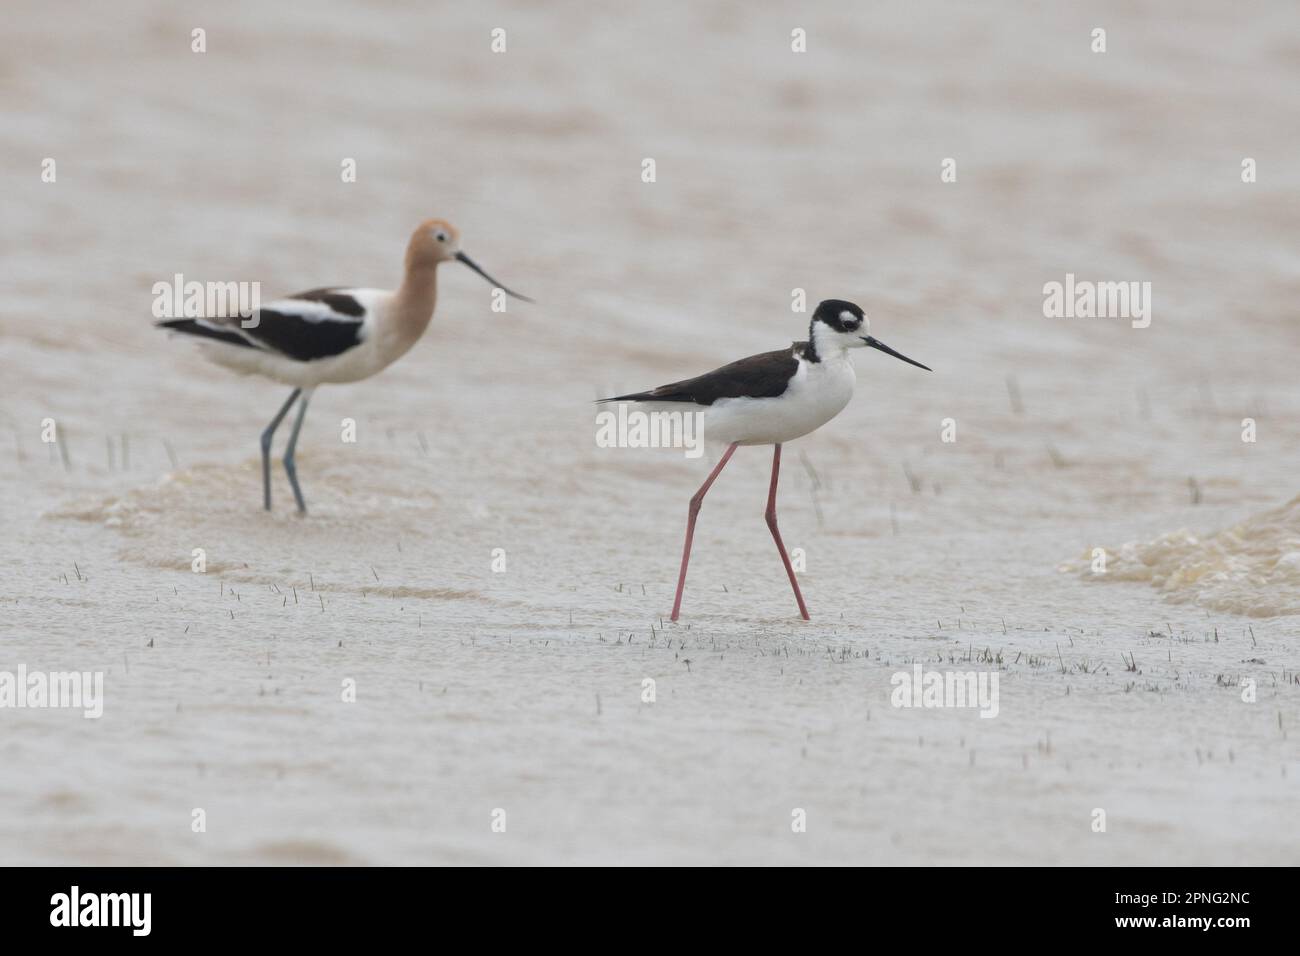 American avocet, Recurvirostra americana, together with a black necked stilt, Himantopus mexicanus, in a vernal pool in California. Stock Photo